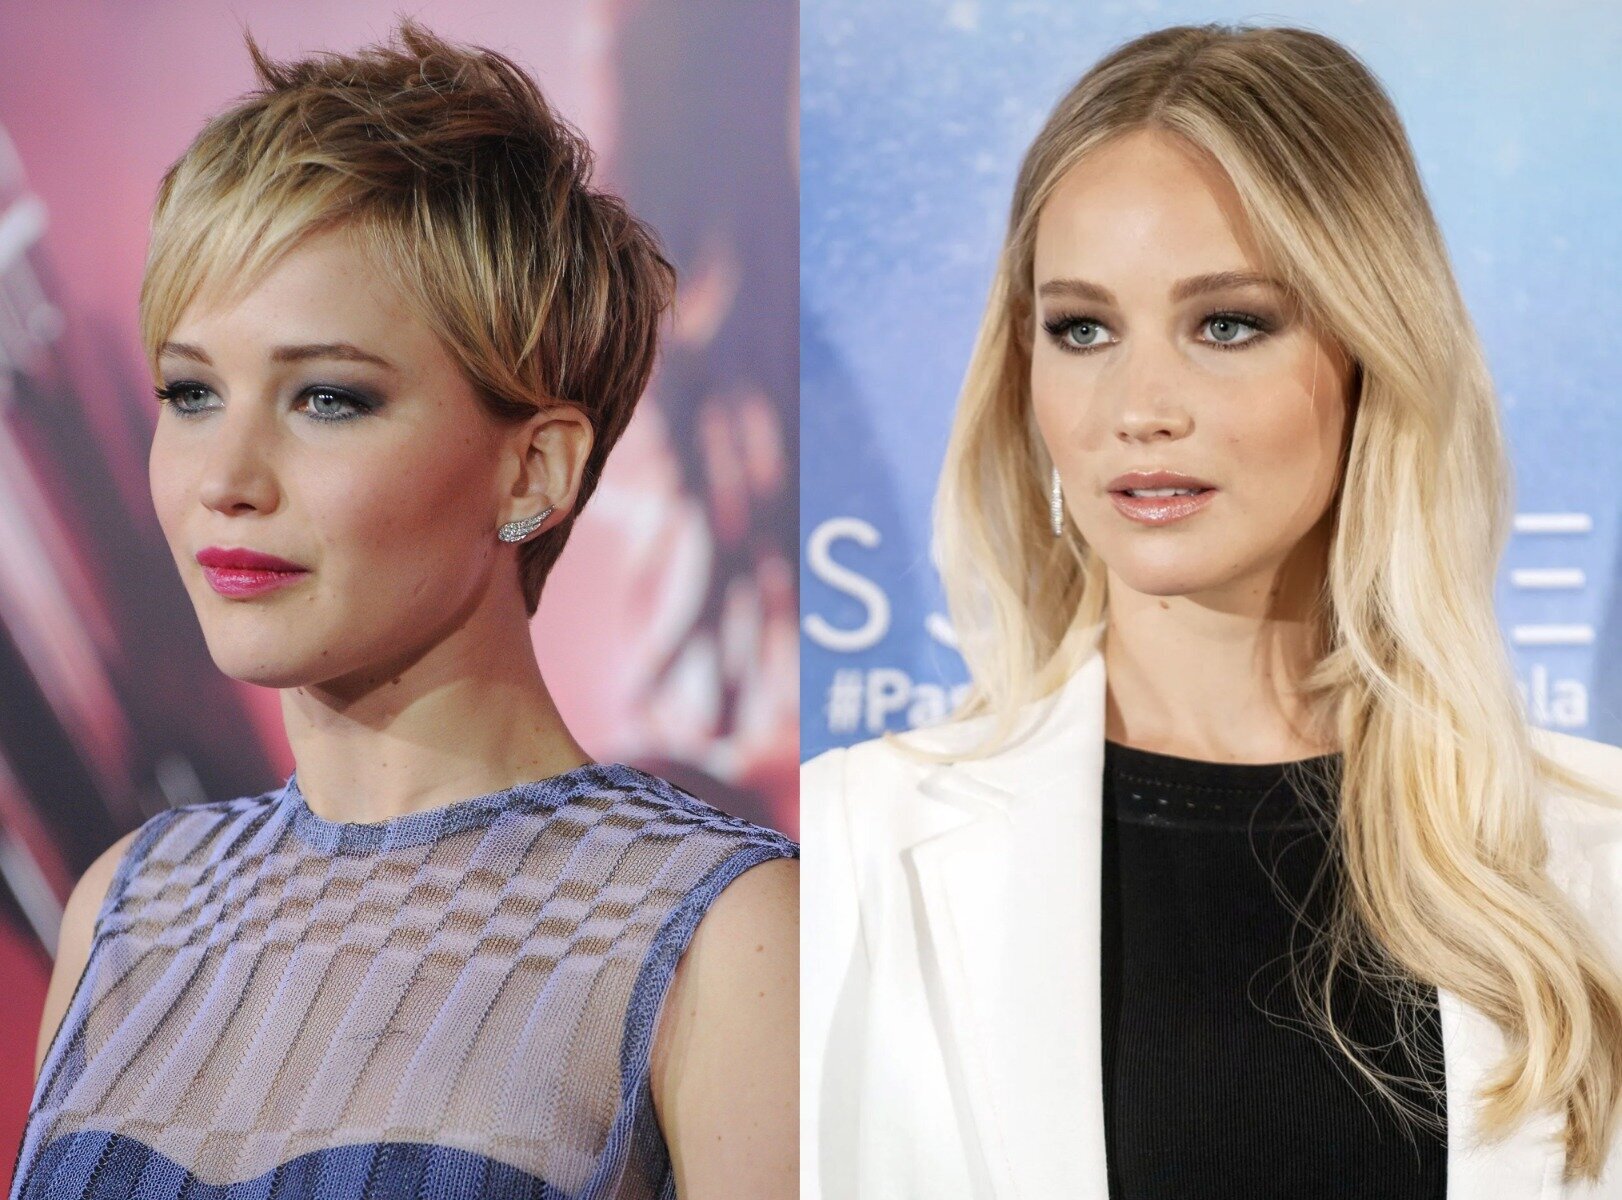 Short or long hair: How to tell which haircut will suit you